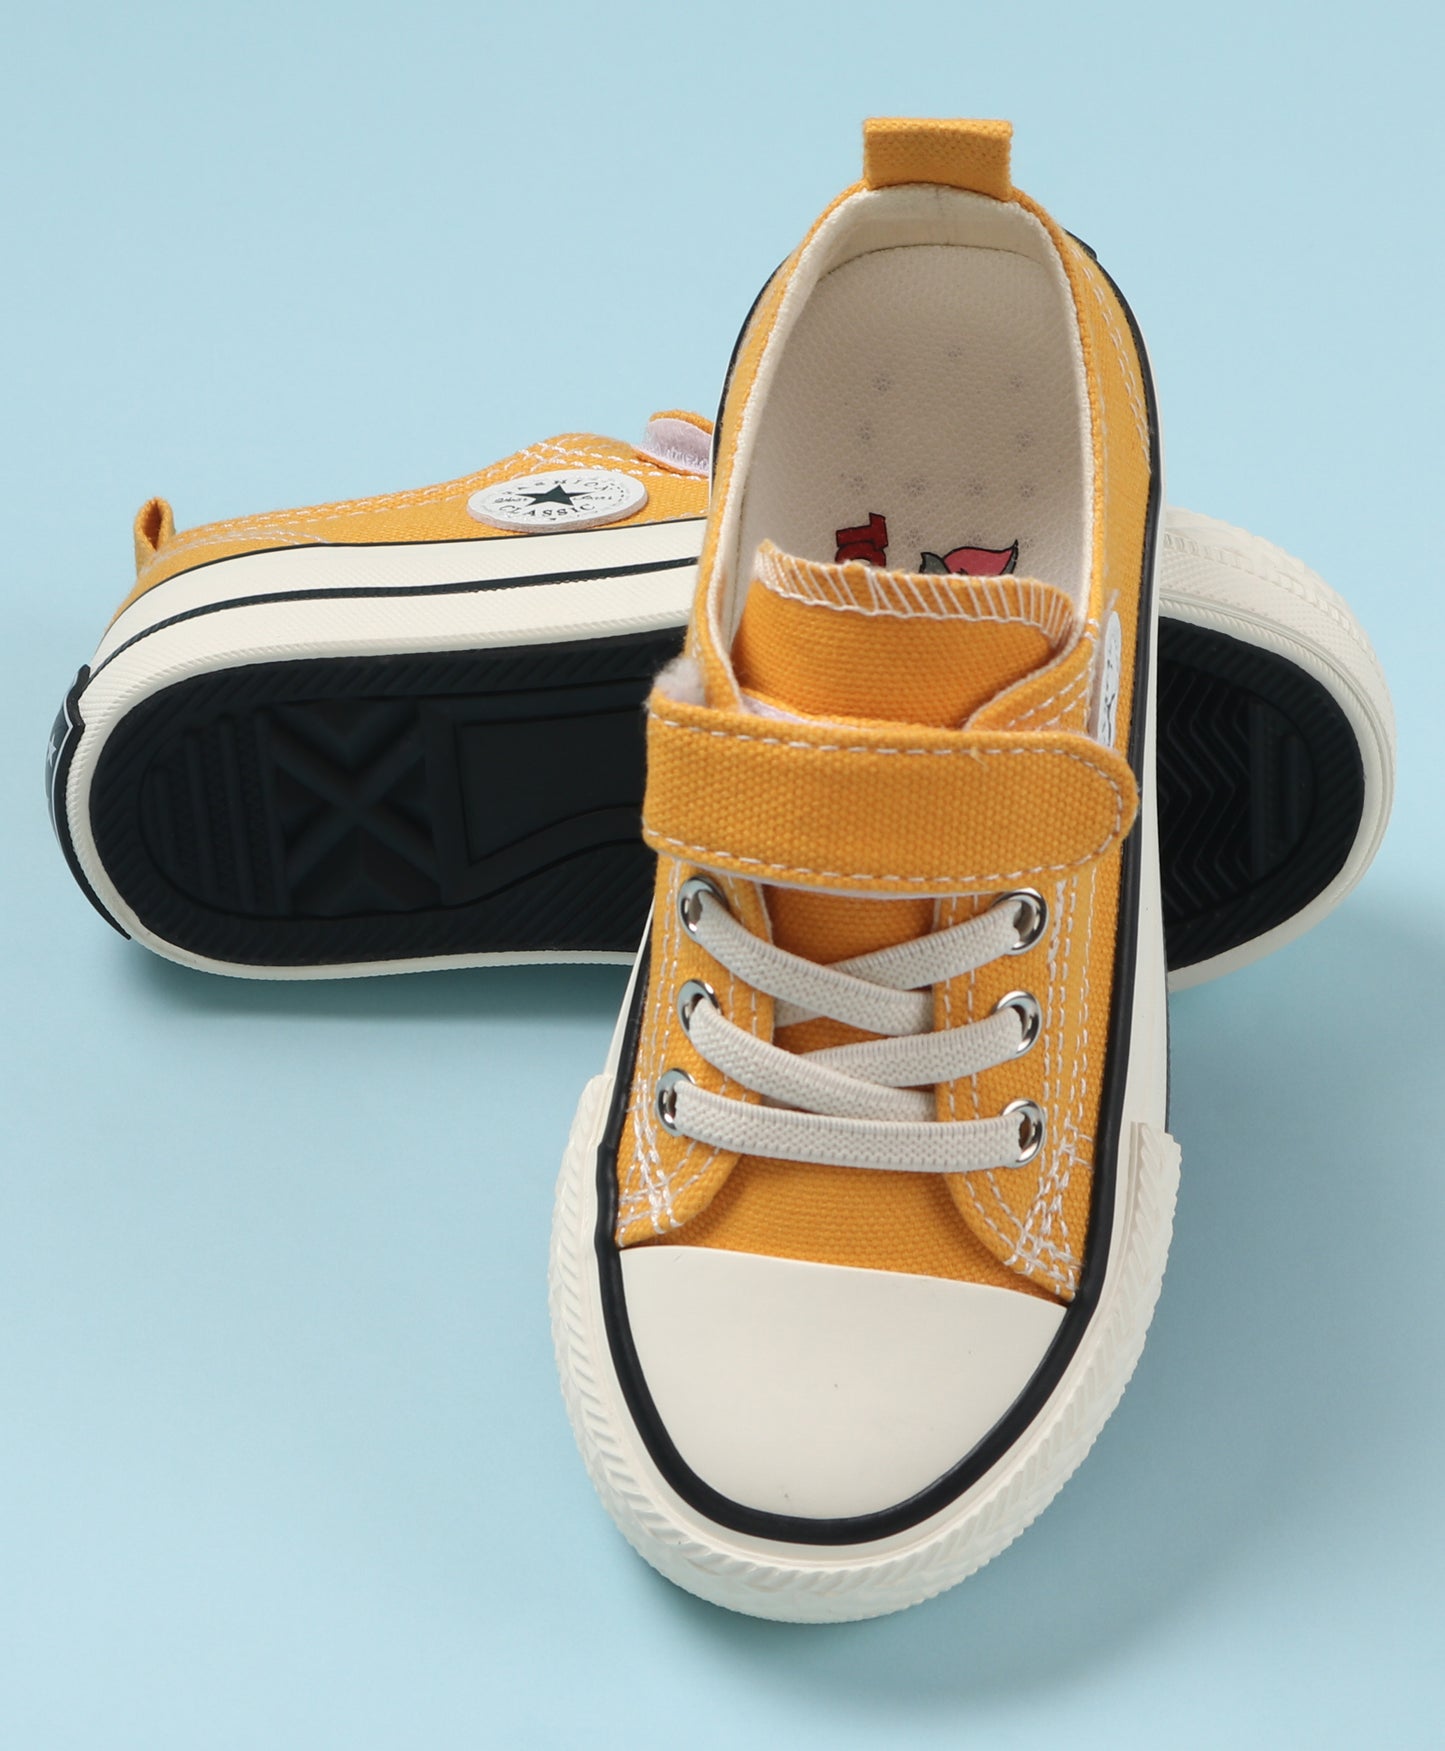 STAR PATCH VELCRO CLOSURE SNEAKERS - YELLOW